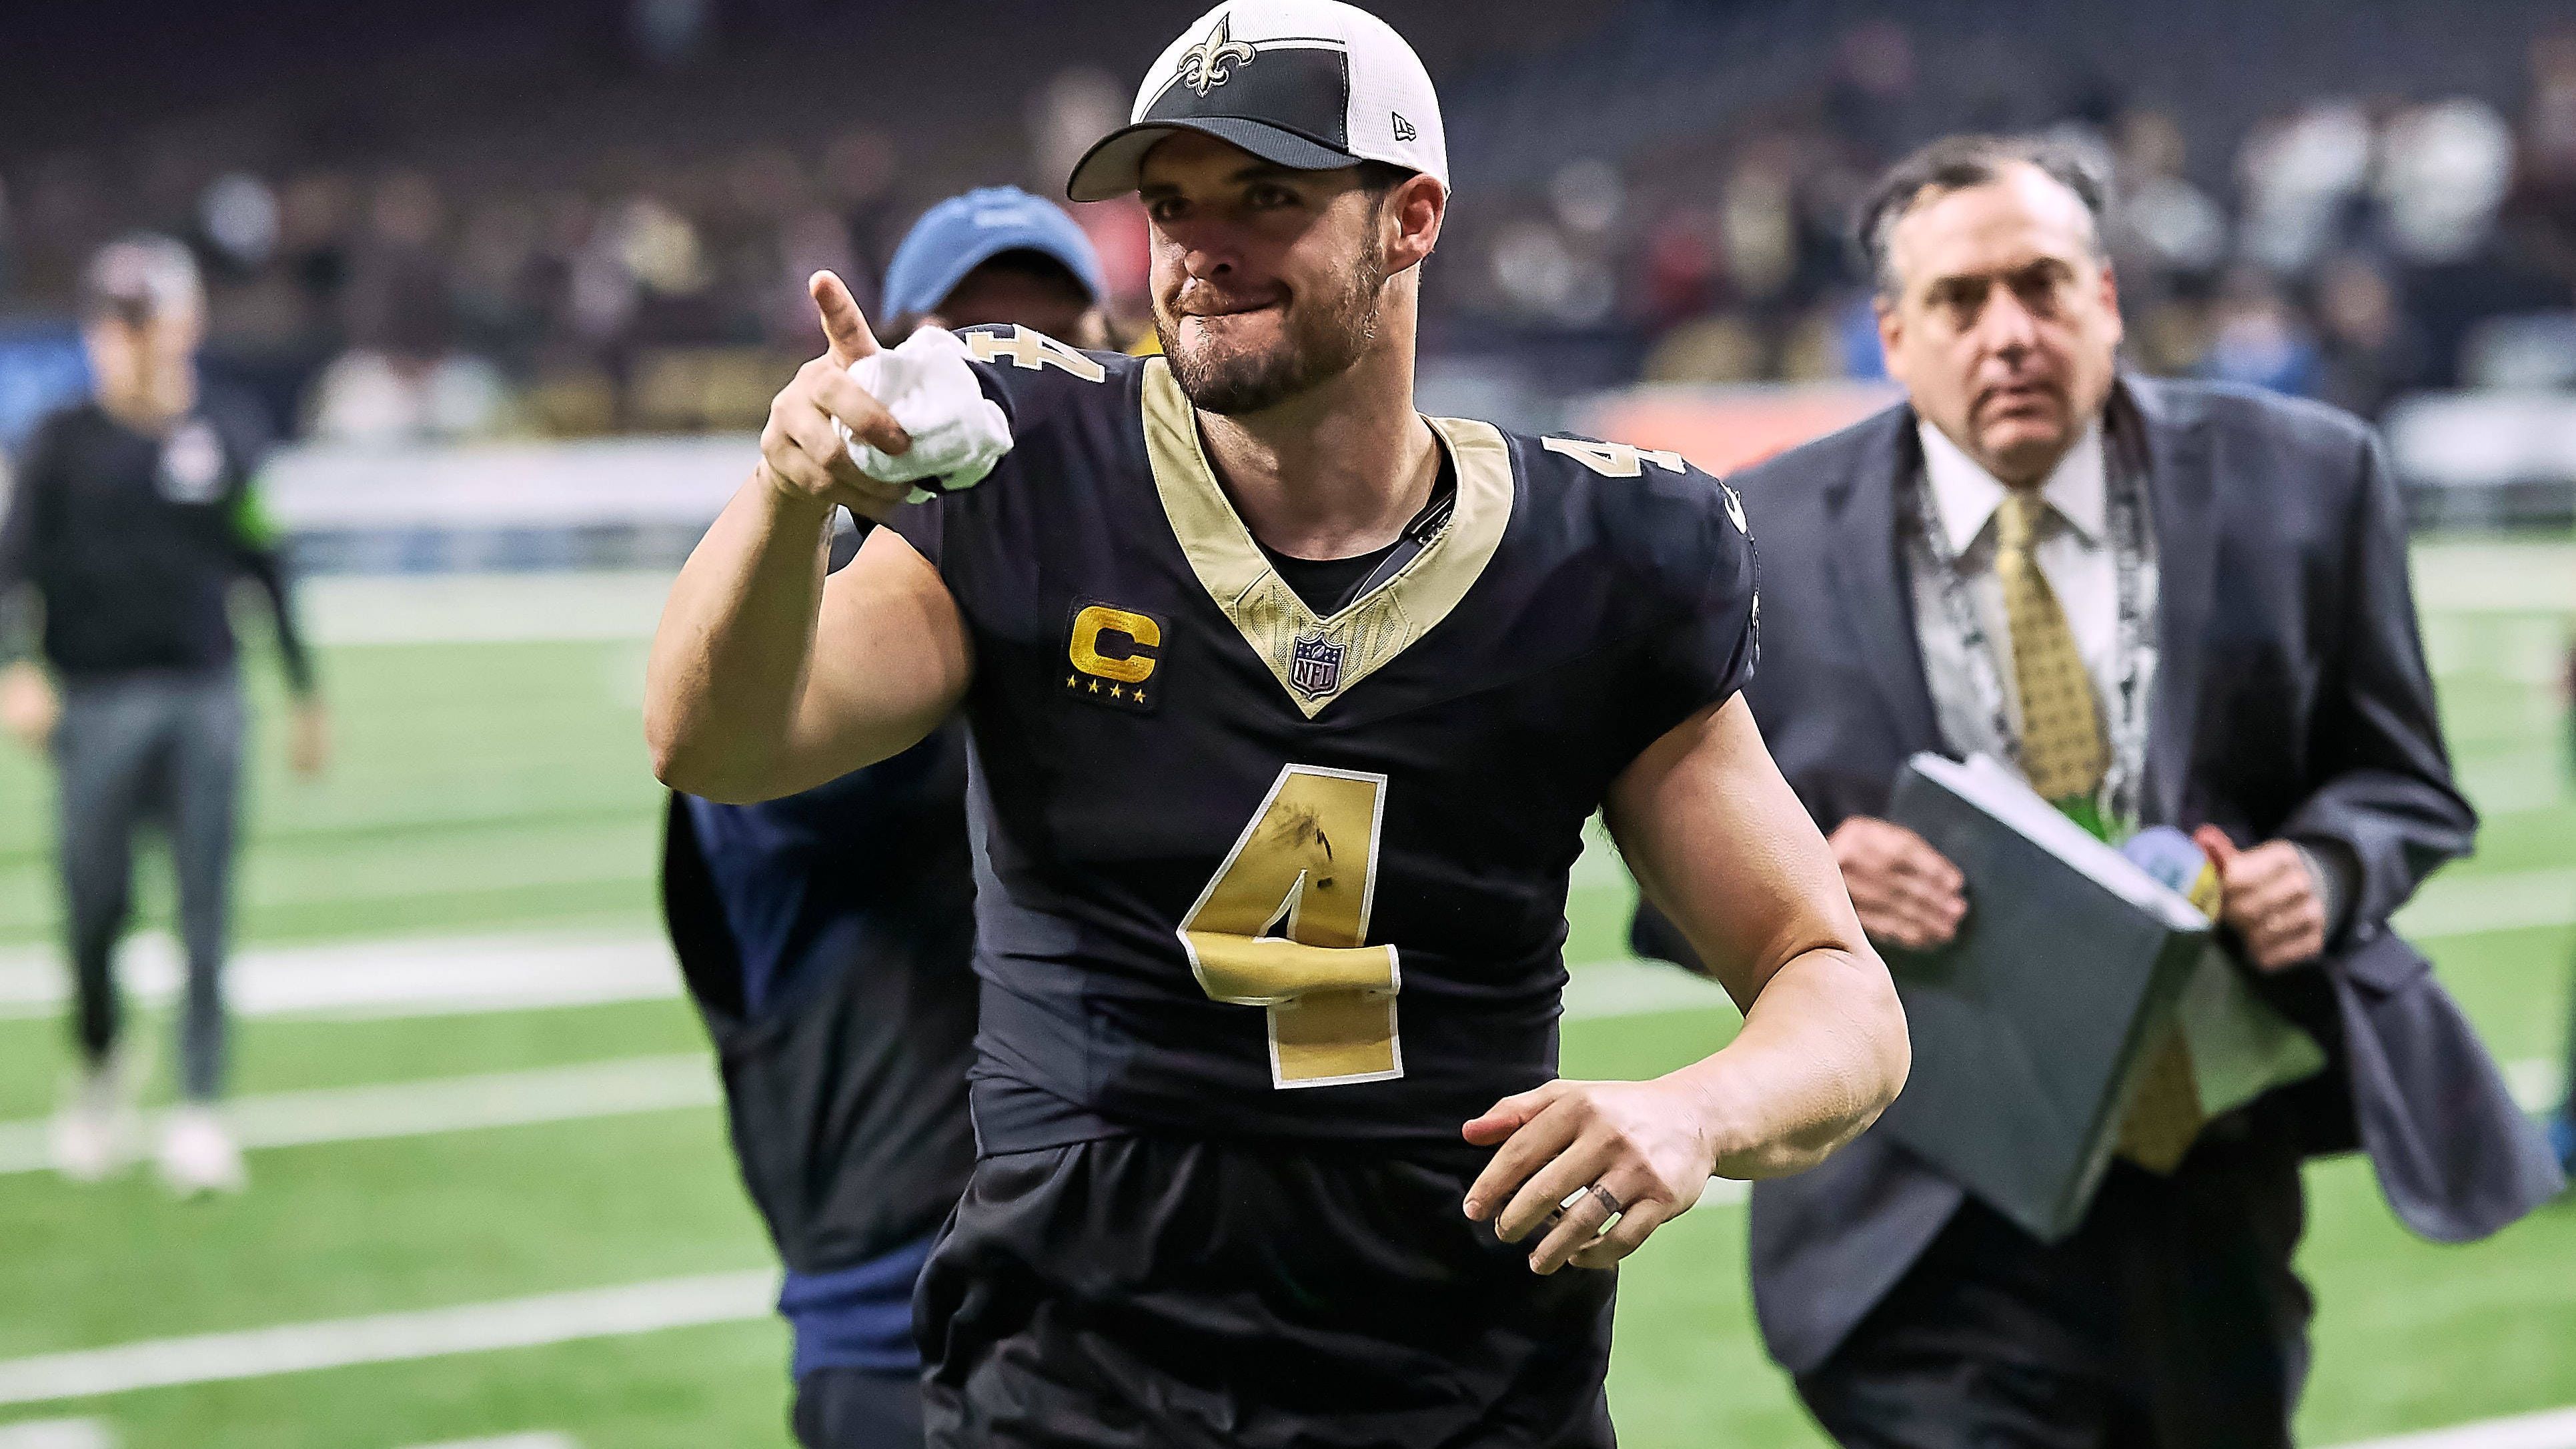 <strong>New Orleans Saints<br></strong><strong>Heim</strong>: Panthers (Week 1), Eagles (Week 3),&nbsp;Buccaneers (Week 6), Broncos (Week 7), Falcons (Week 10),&nbsp;Browns (Week 11),&nbsp;Rams (Week 13), Commanders (Week 15), , Raiders (Week 17)<br><strong>Auswärts</strong>: Cowboys (Week 2),&nbsp;Falcons (Week 4), Chiefs (Week 5), Chargers (Week 8),&nbsp;Panthers (Week 9), Giants (Week 14), Packers (Week 16), Buccaneers (Week 18),<br><strong>Bye</strong>: Week 12